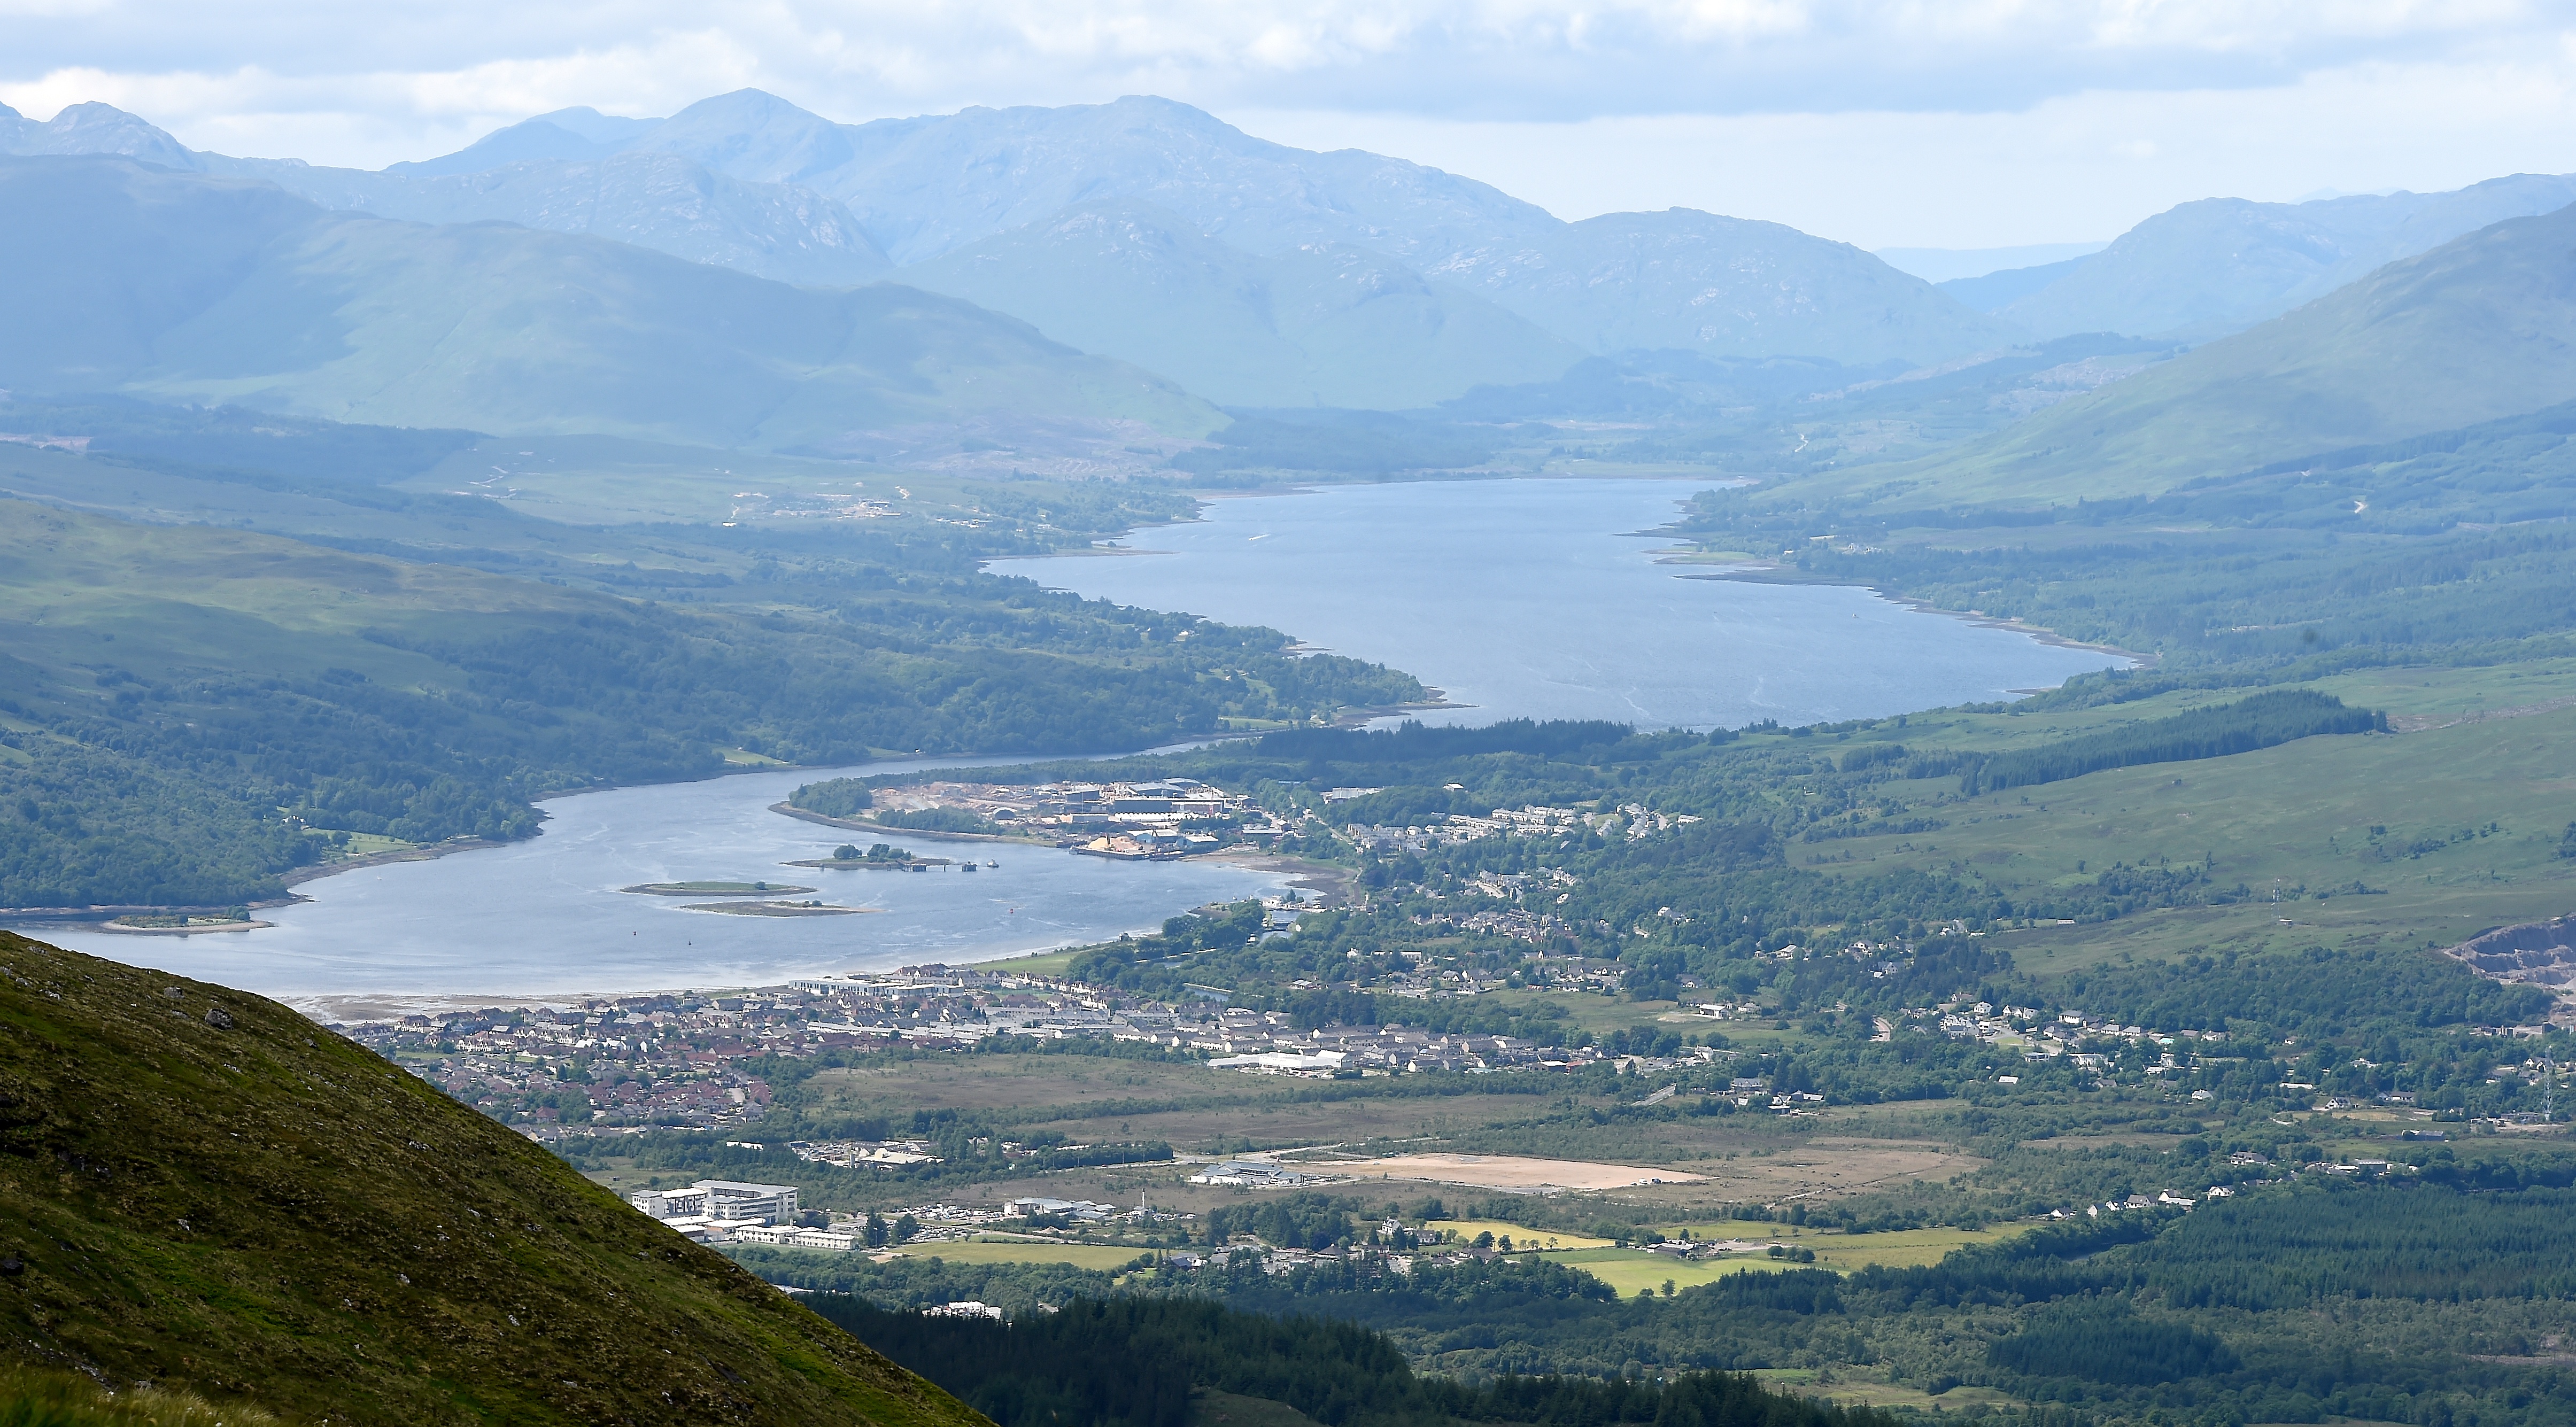 Scottish Highlands: Fort William, Loch Linnhe (left) with the village of Caol and then Loch Eil in the distance. Lochaber spotted in the bottom left